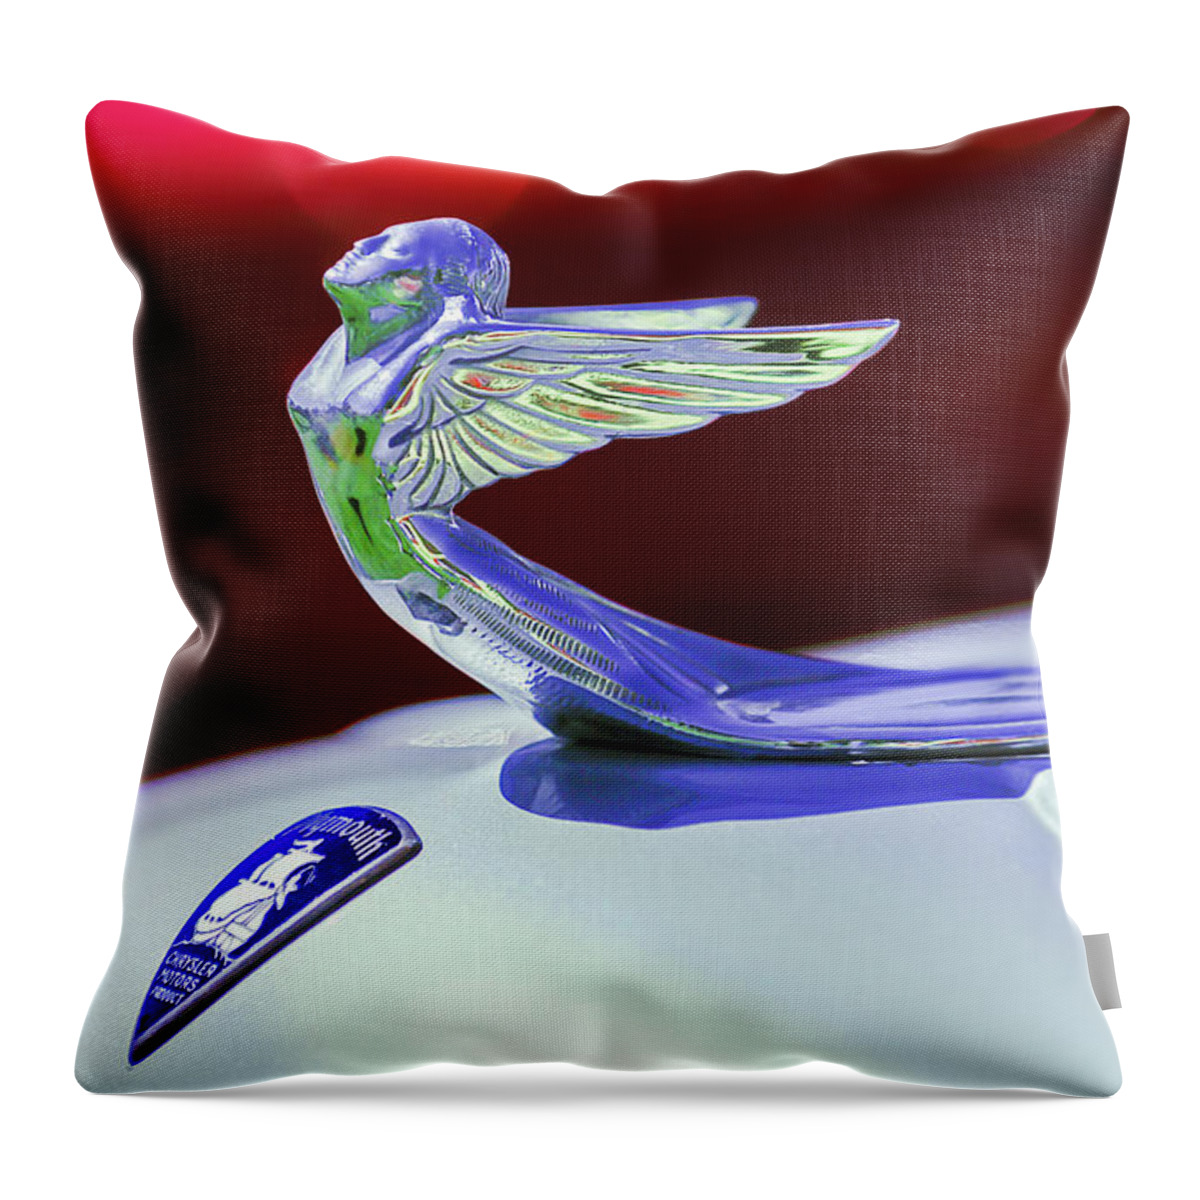 1933 Plymouth Hood Ornament Throw Pillow featuring the photograph 1933 Plymouth Hood Ornament -0121rc by Jill Reger